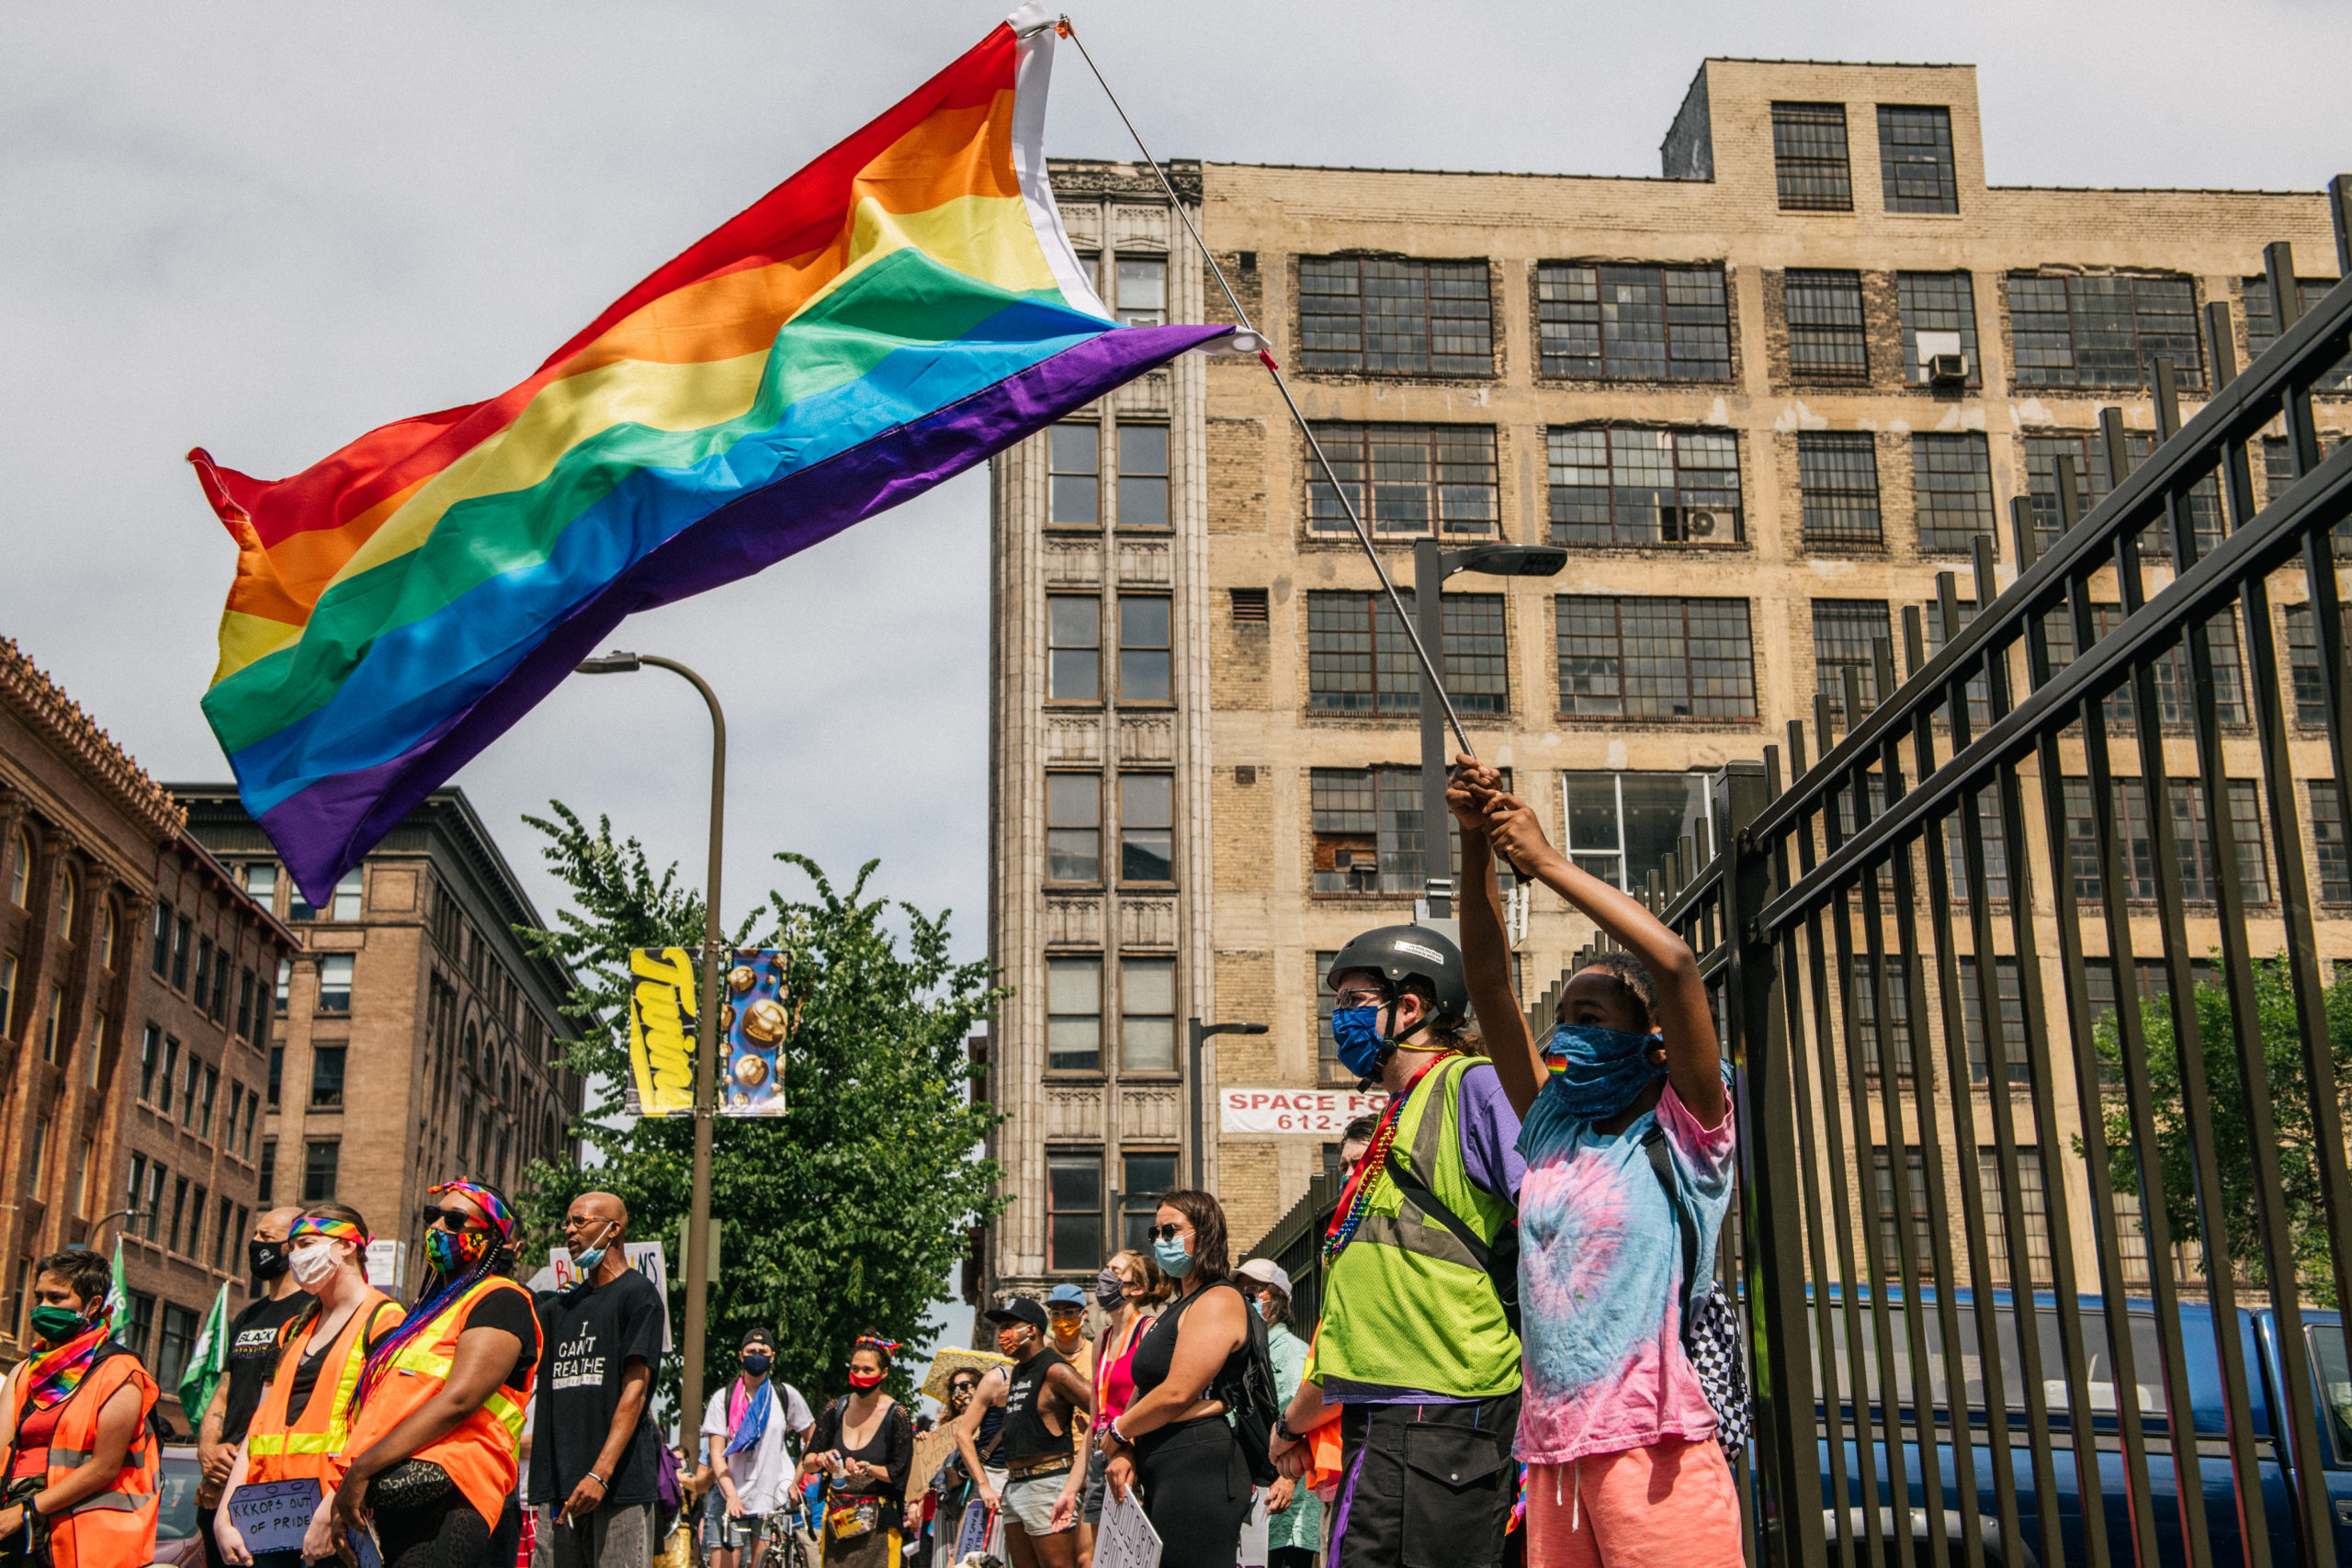 A girl waves a flag as people gather in front of the Minneapolis First Precinct during a Pride march on June 28, 2020 in Minneapolis, Minnesota. The demonstration was a call for justice for George Floyd, and all victims of police murder. Demonstrators rallied to defend Black trans lives and demand community control of law enforcement. (Photo by Brandon Bell/Getty Images)